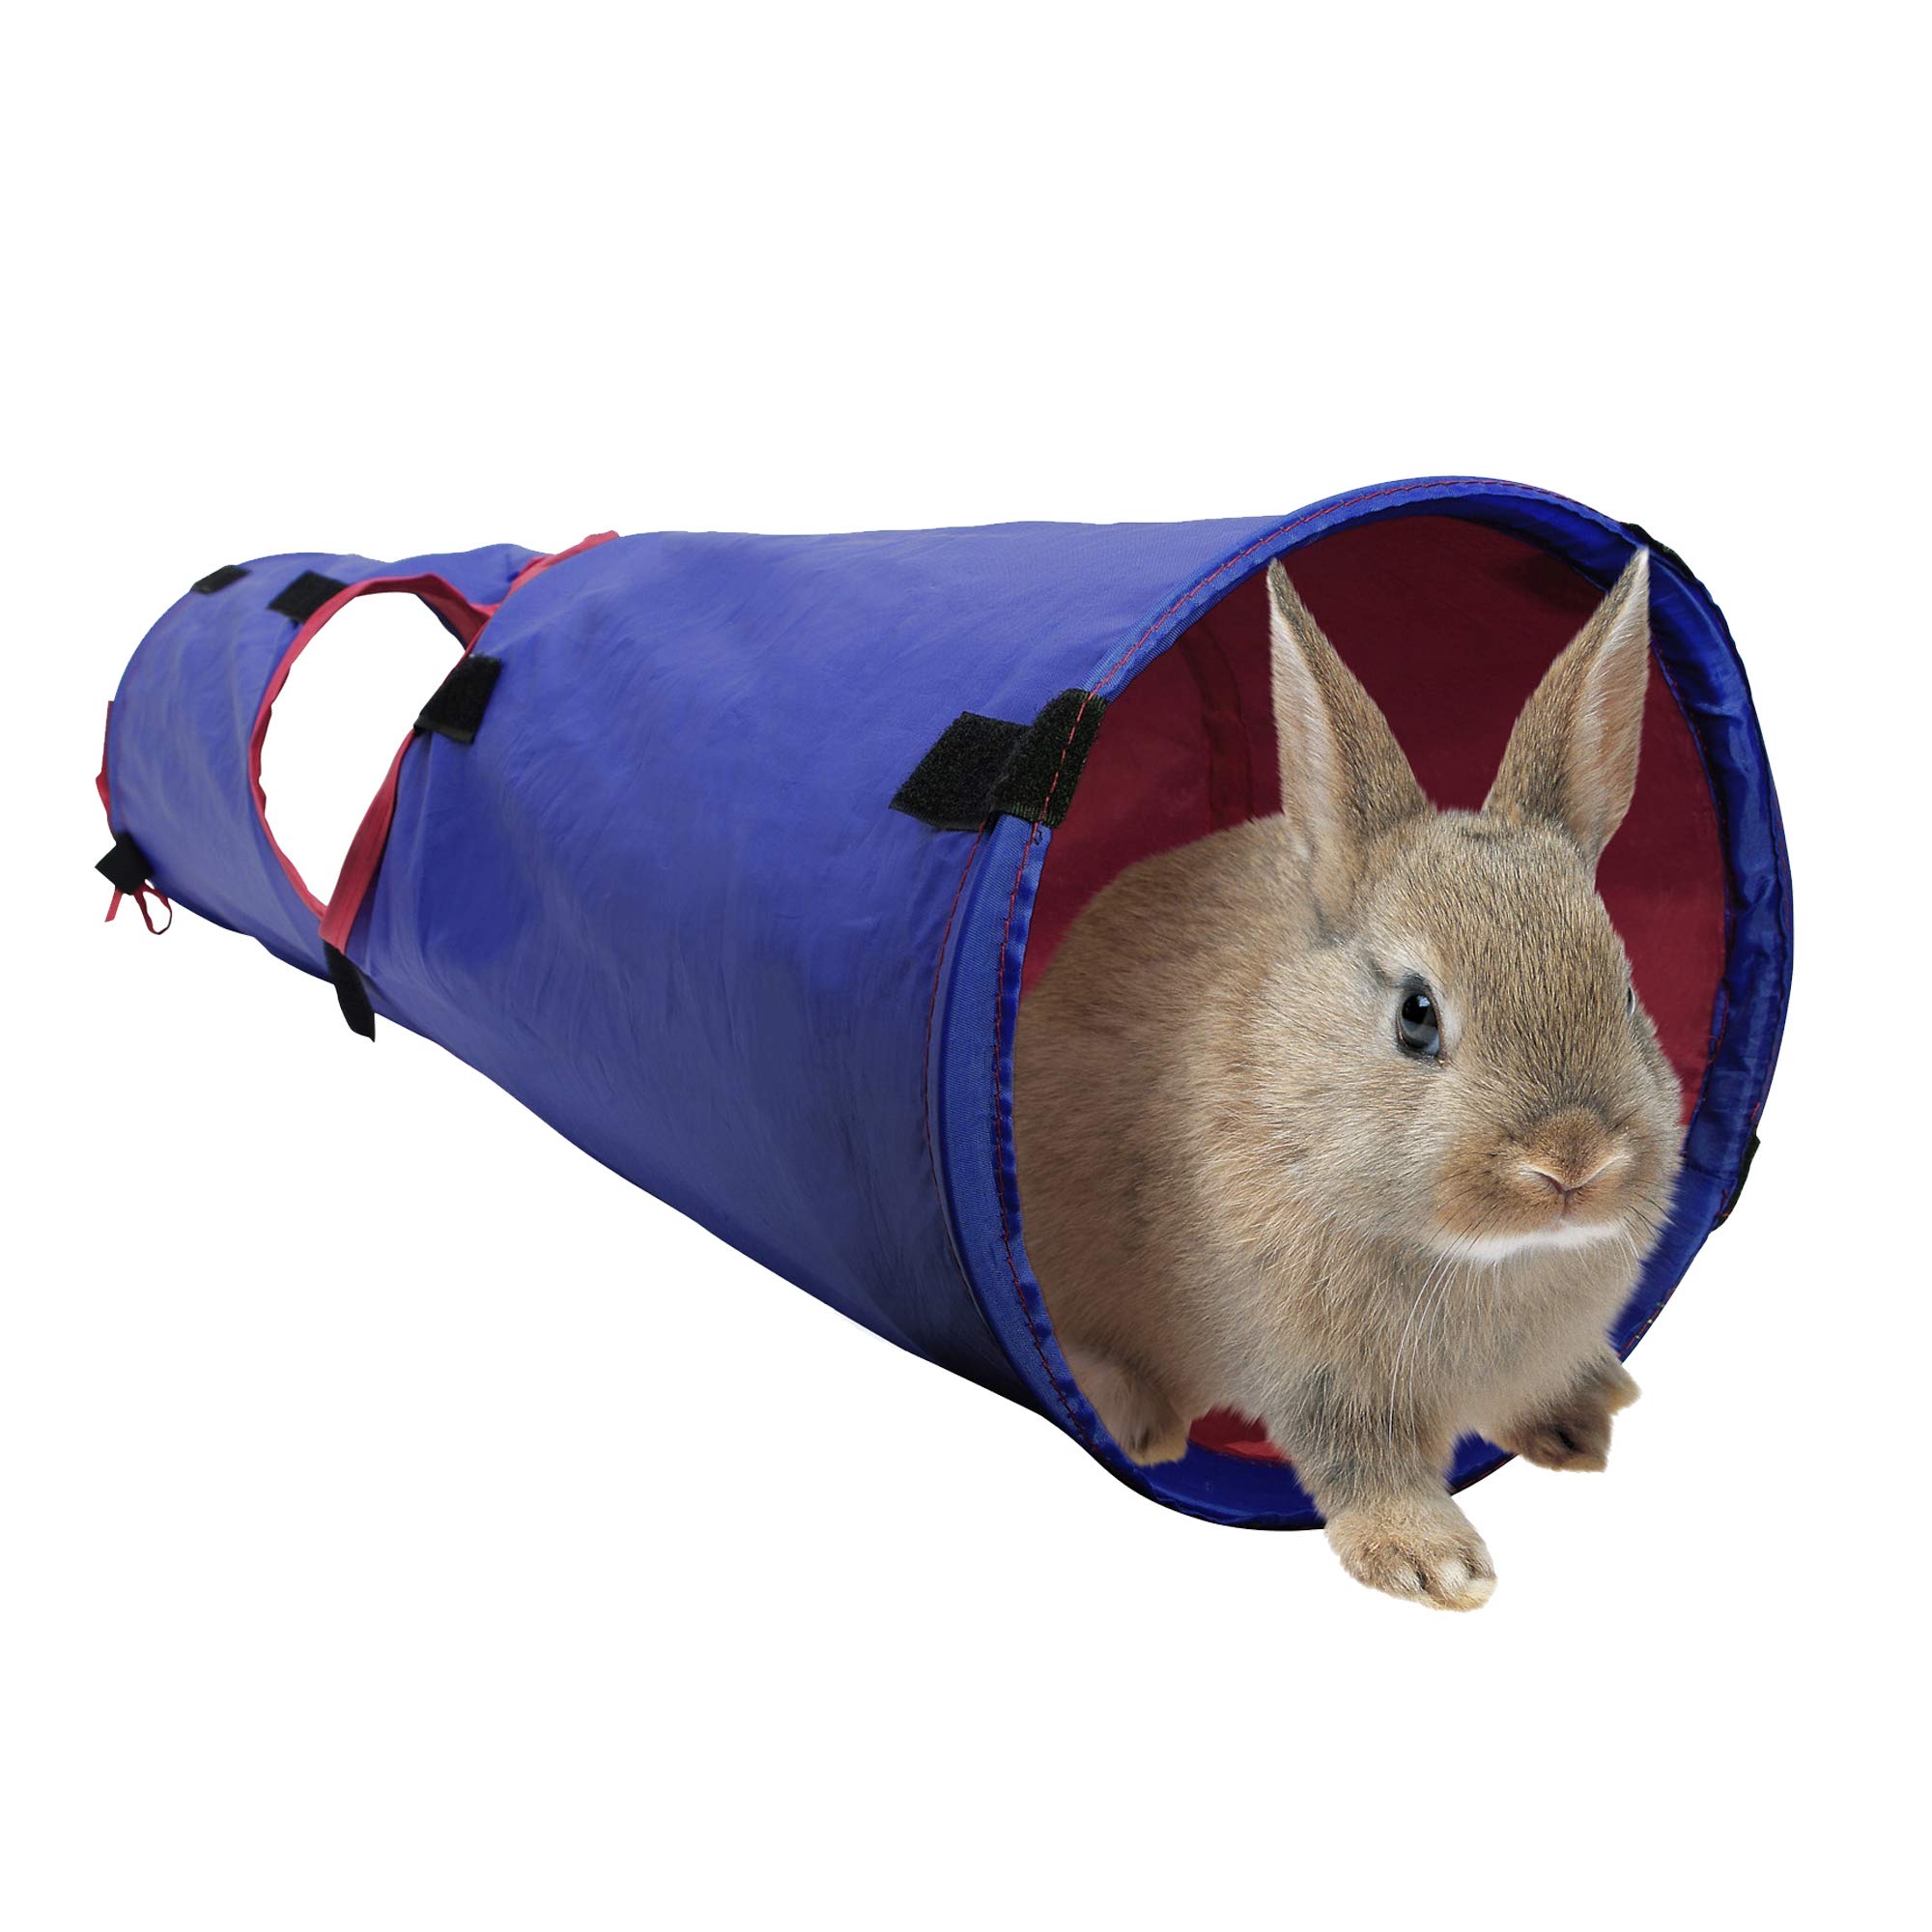 Book Cover Living World Pet Tunnel, Small Animal Tunnel for Rabbits and Guinea Pigs, Blue/Red, 61397 Large Standard Packaging